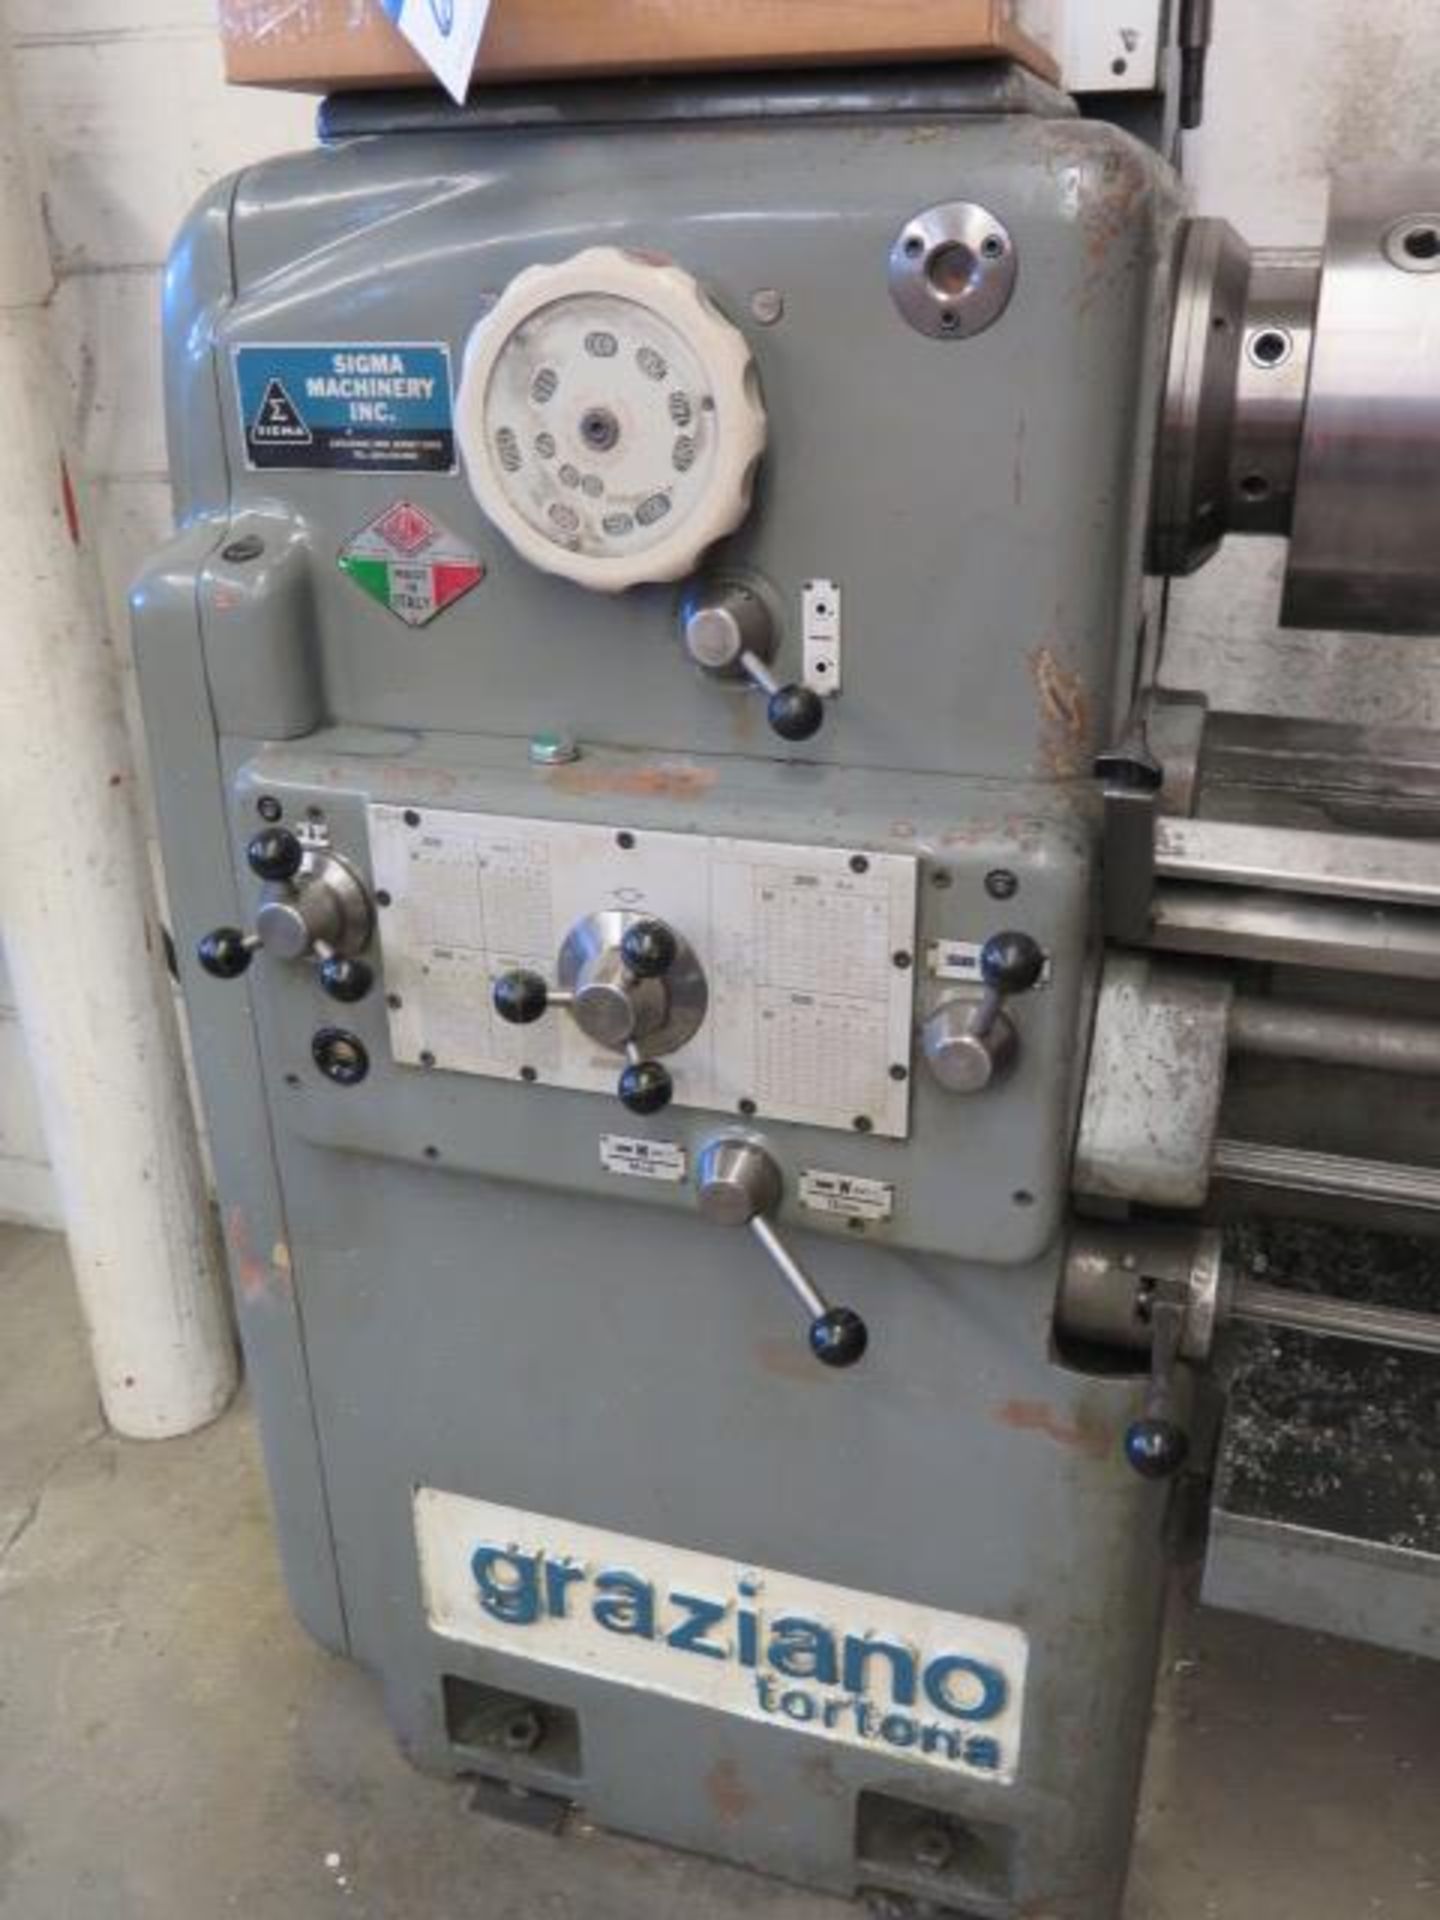 Graziano Tortona SAG 14 15" x 58" Geared Head Lathe s/n 128859 w/ 40-1500 RPM, Inch/mm, SOLD AS IS - Image 5 of 18